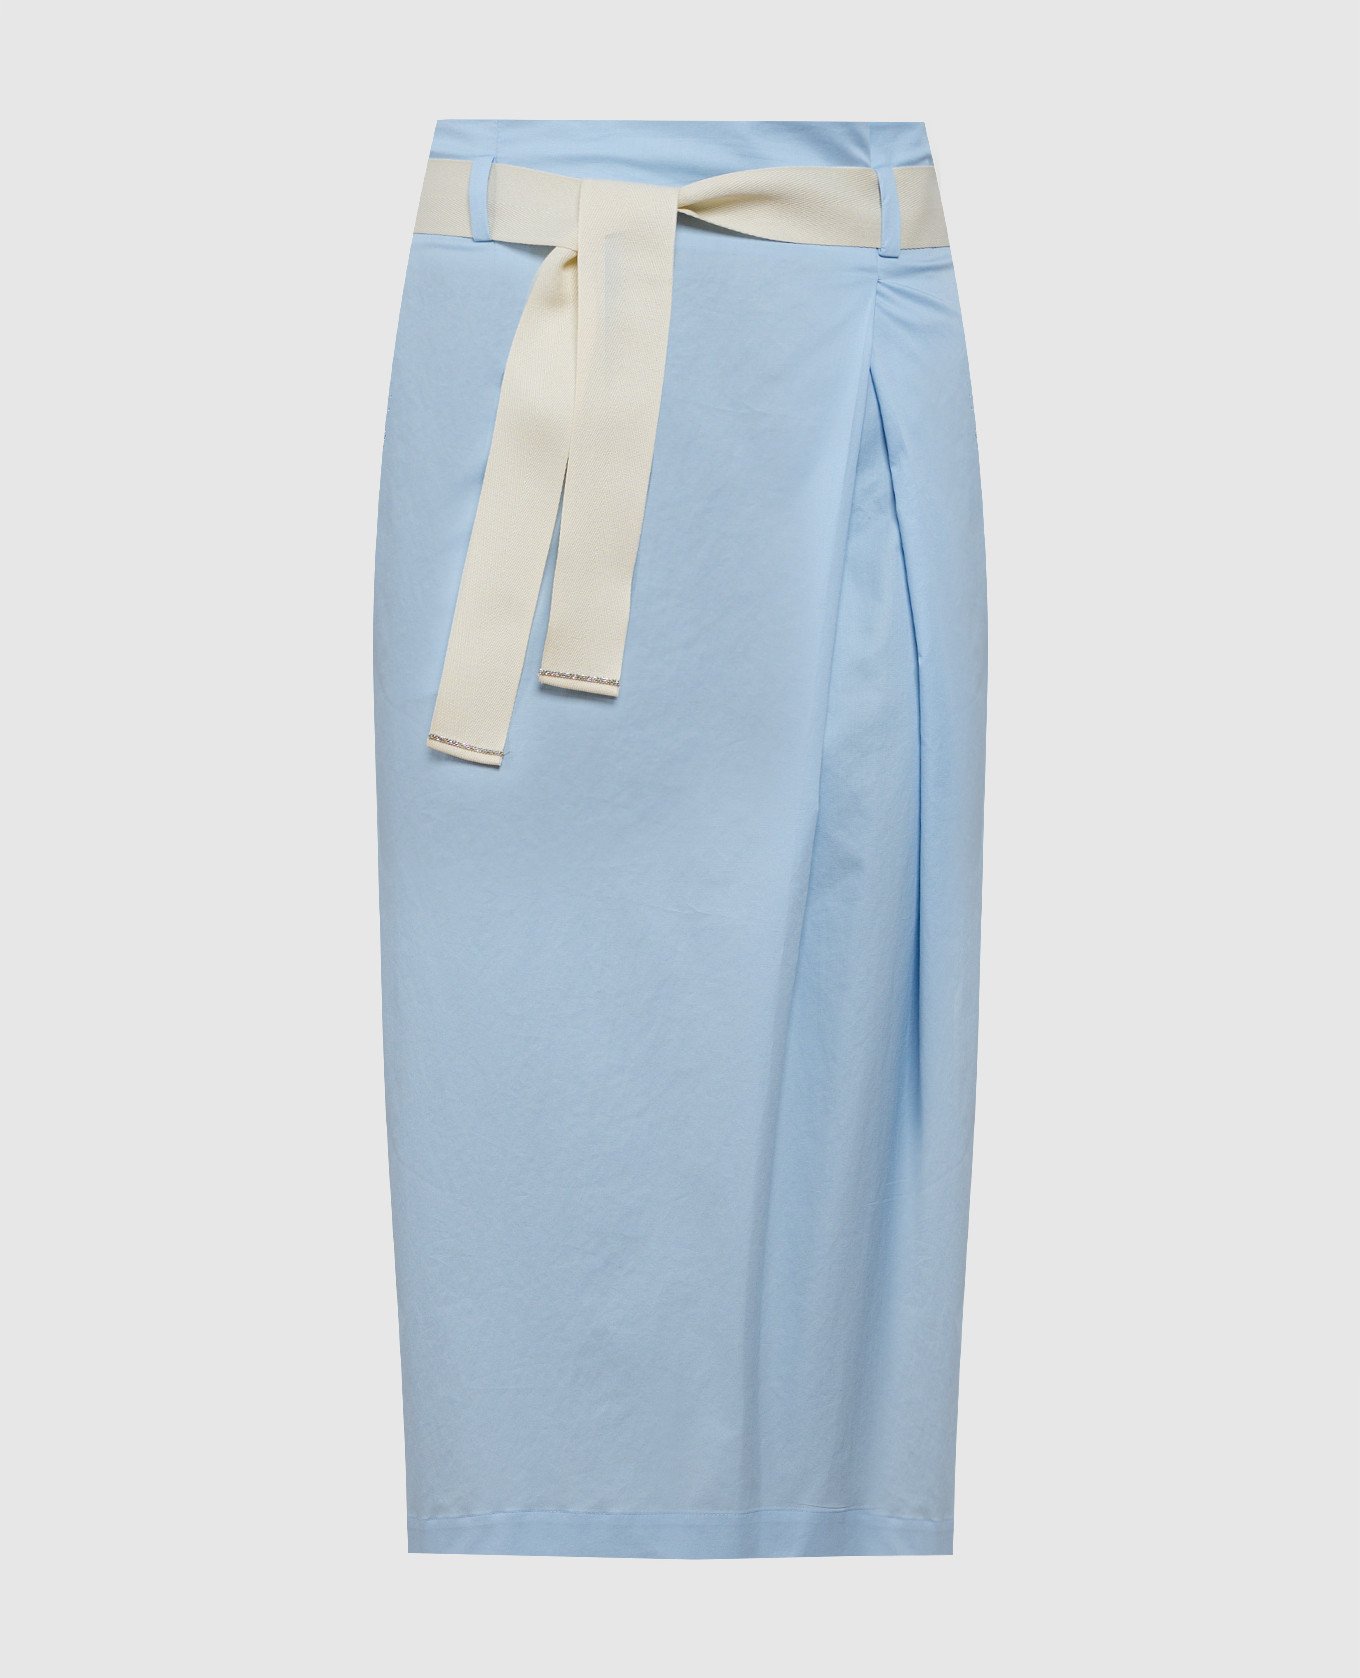 Blue skirt with monil chain and belt